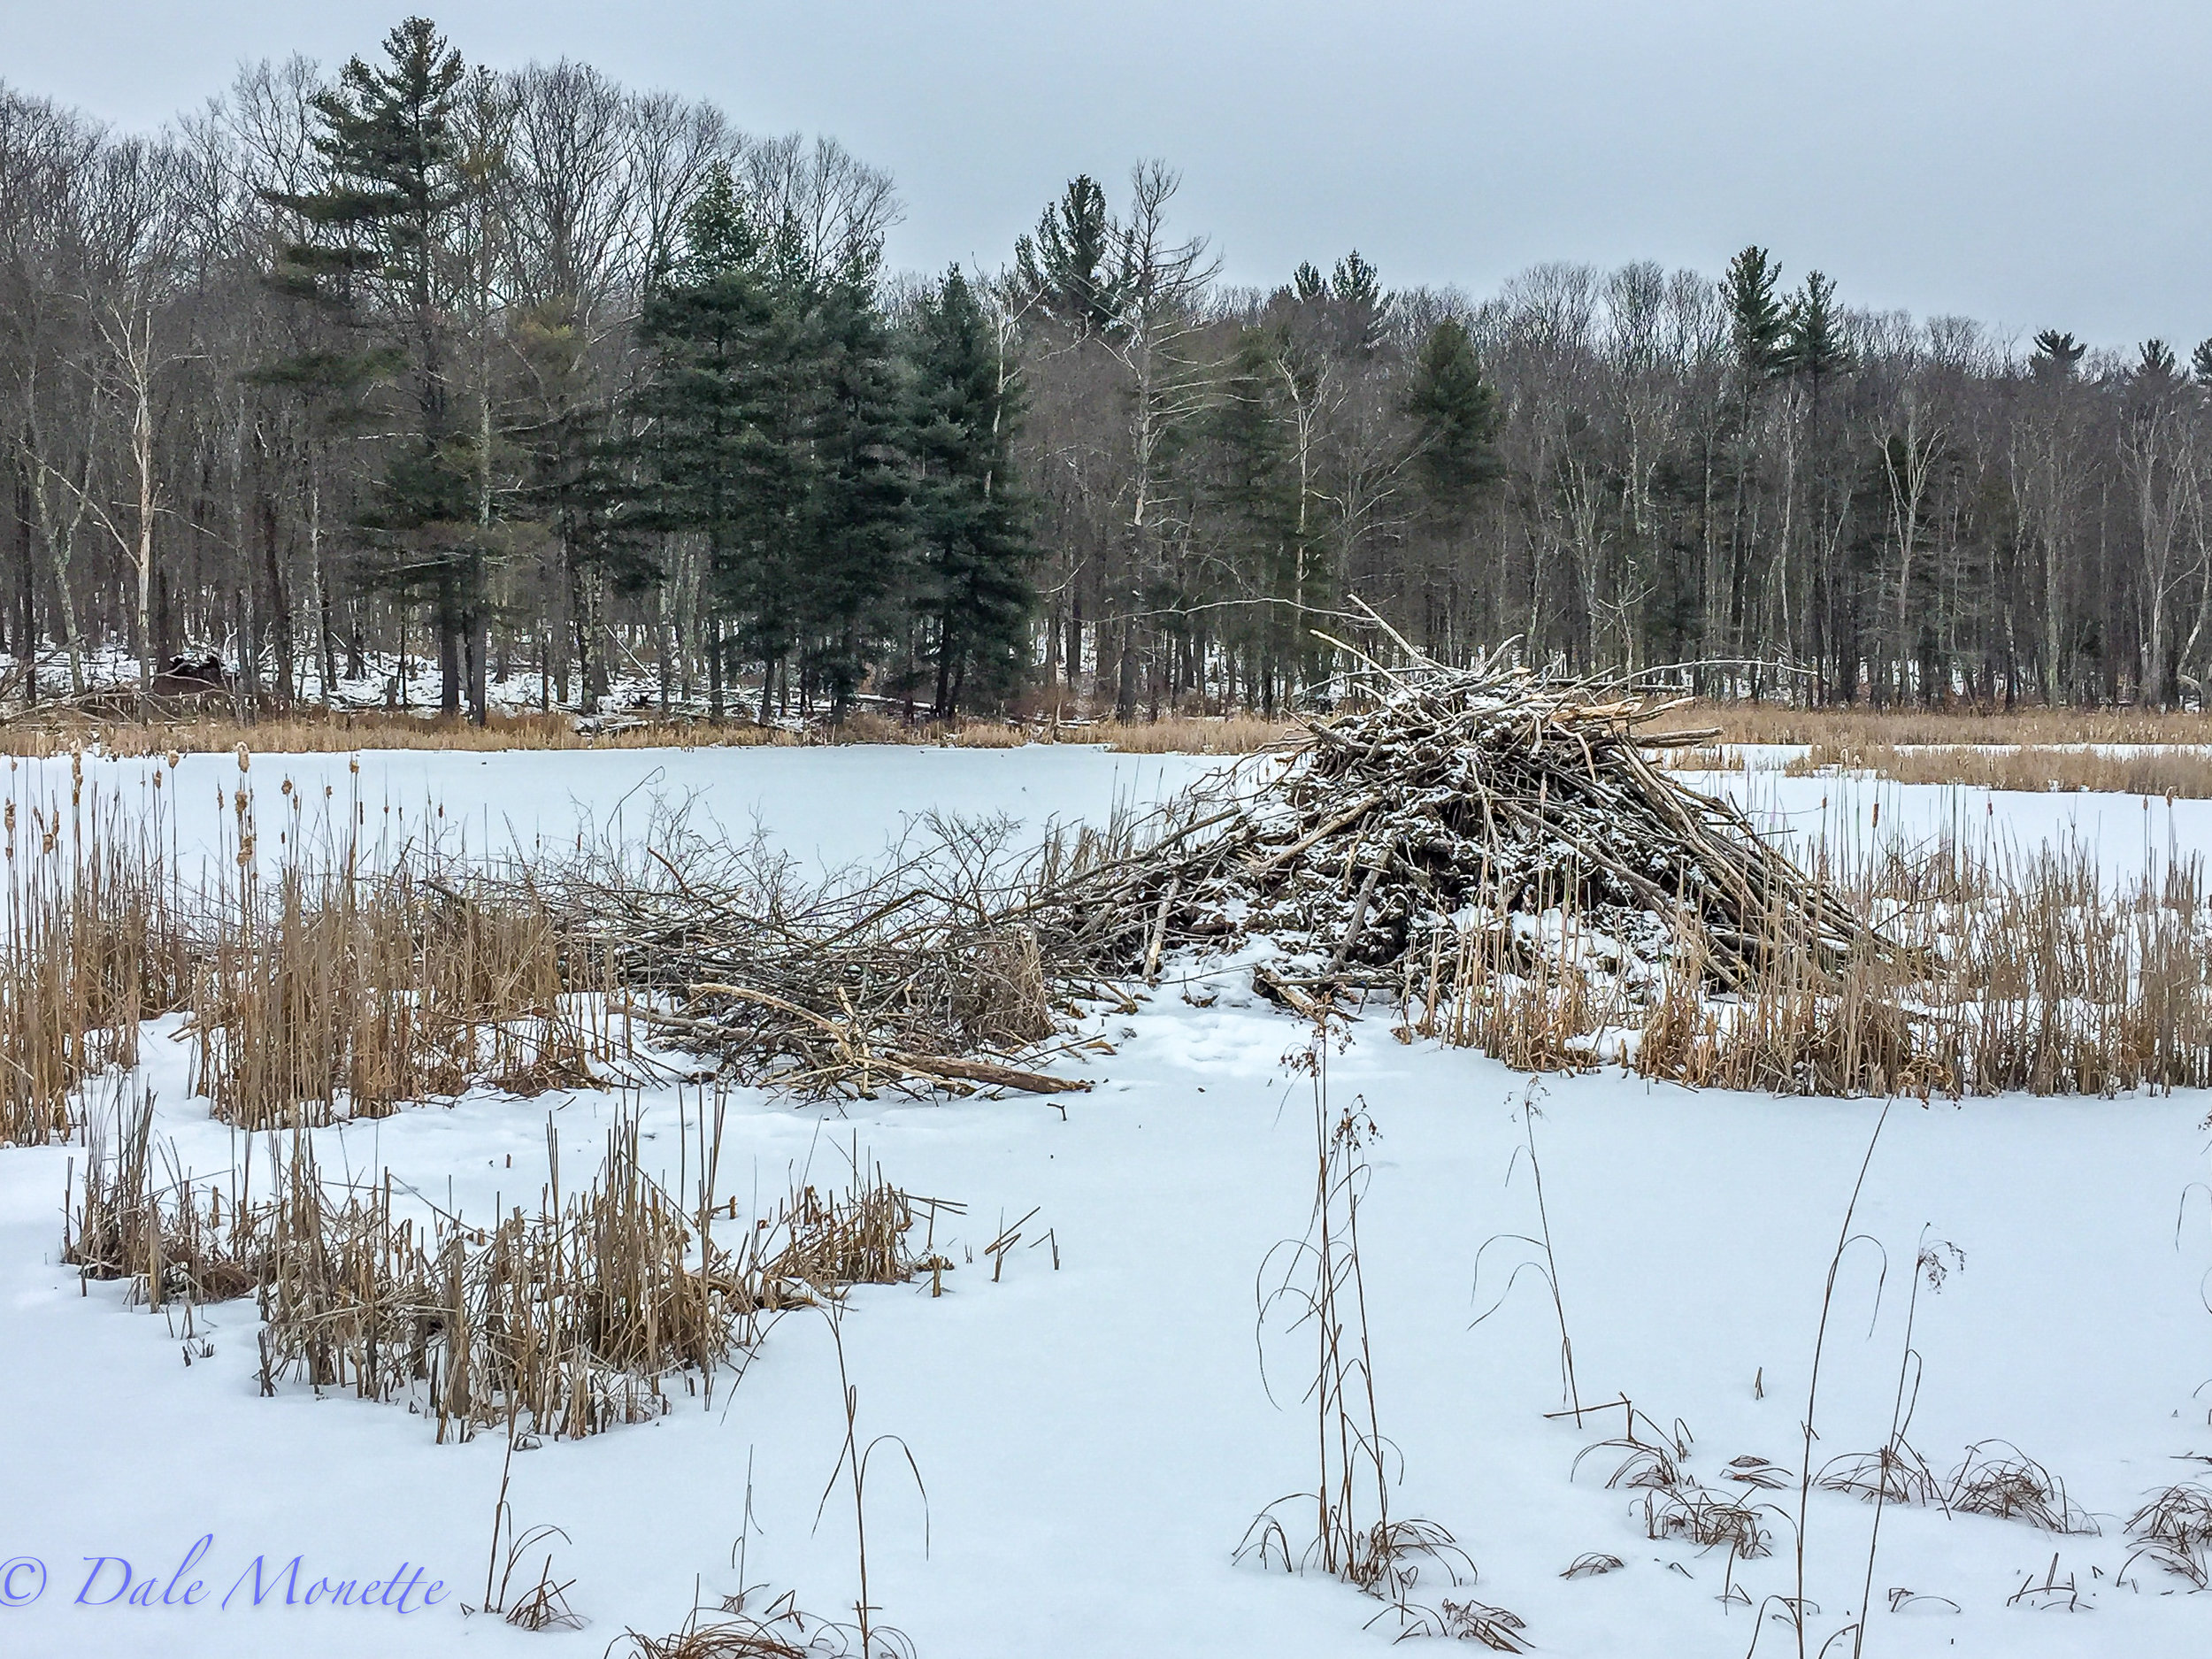      I decided for a change of pace for myself this morning and hiked in to see how one of my three friendly clans of beavers I've spent years photographing are doing this winter. I found them doing great with a large cache of twigs left for the next